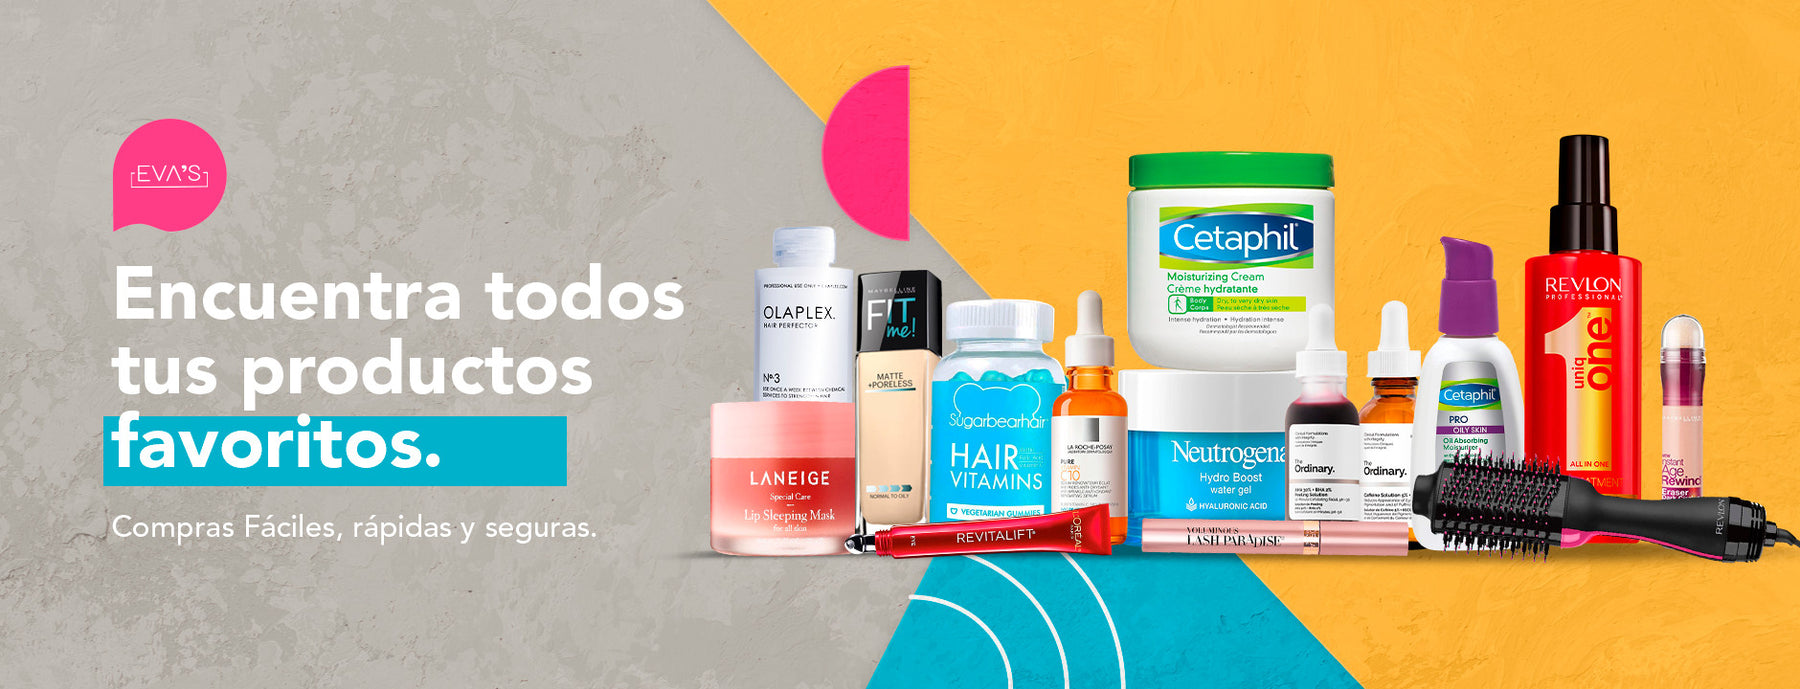 Maquillaje collection banner